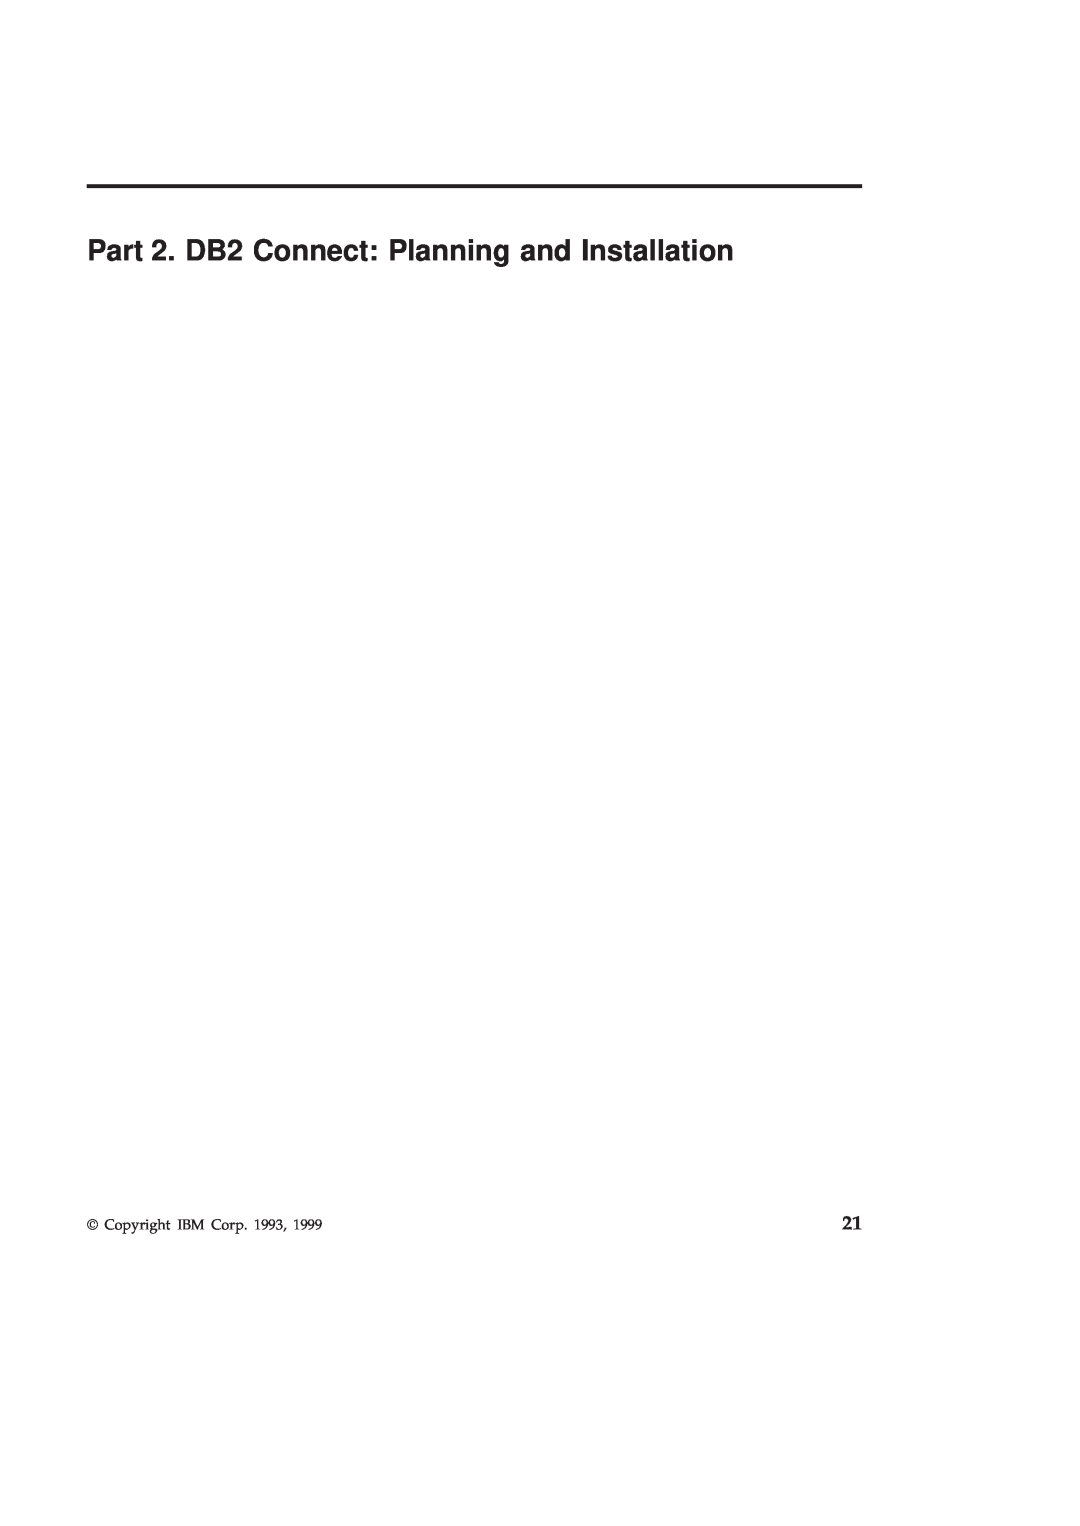 IBM GC09-2830-00 manual Part 2. DB2 Connect Planning and Installation, Copyright IBM Corp. 1993 